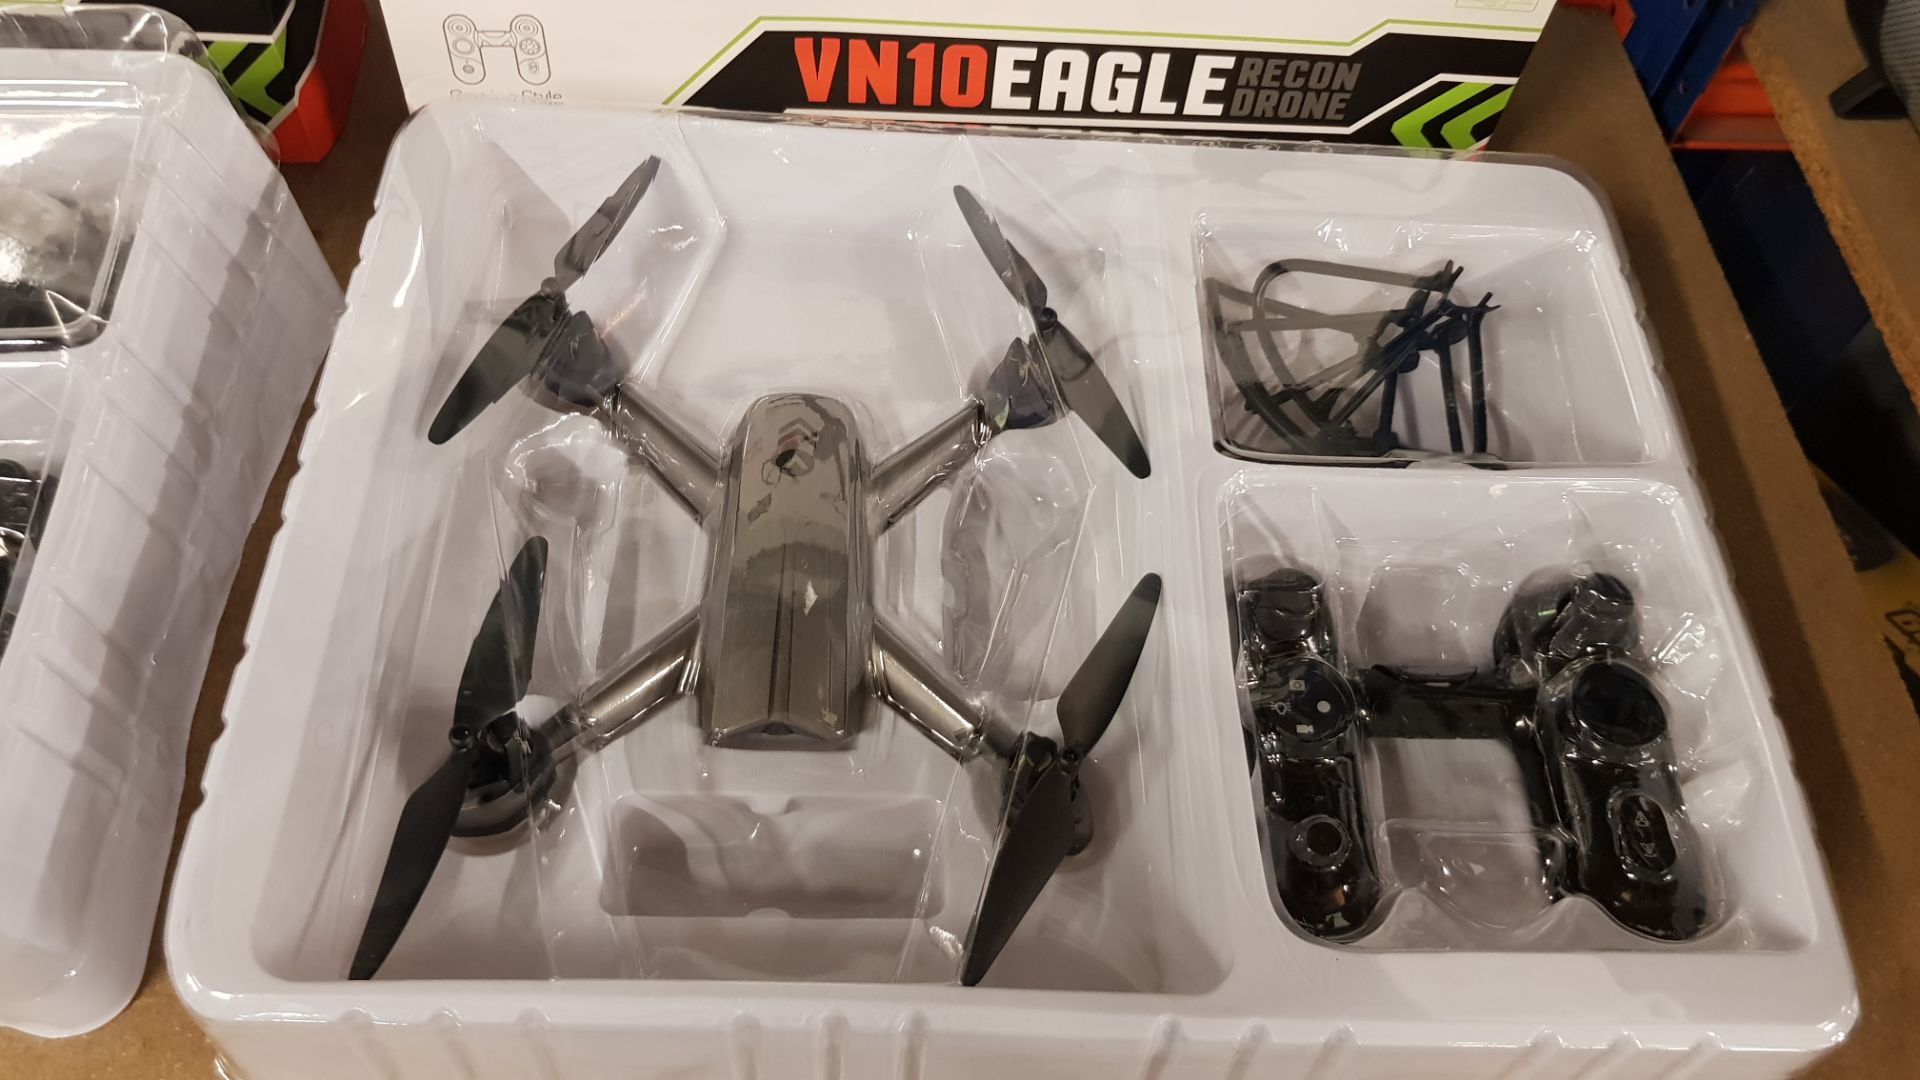 (11C) Lot RRP £90. 2x Tobar Venom VN10 Eagle Recon Drone With Camera. (All Units Have Return To... - Image 8 of 16